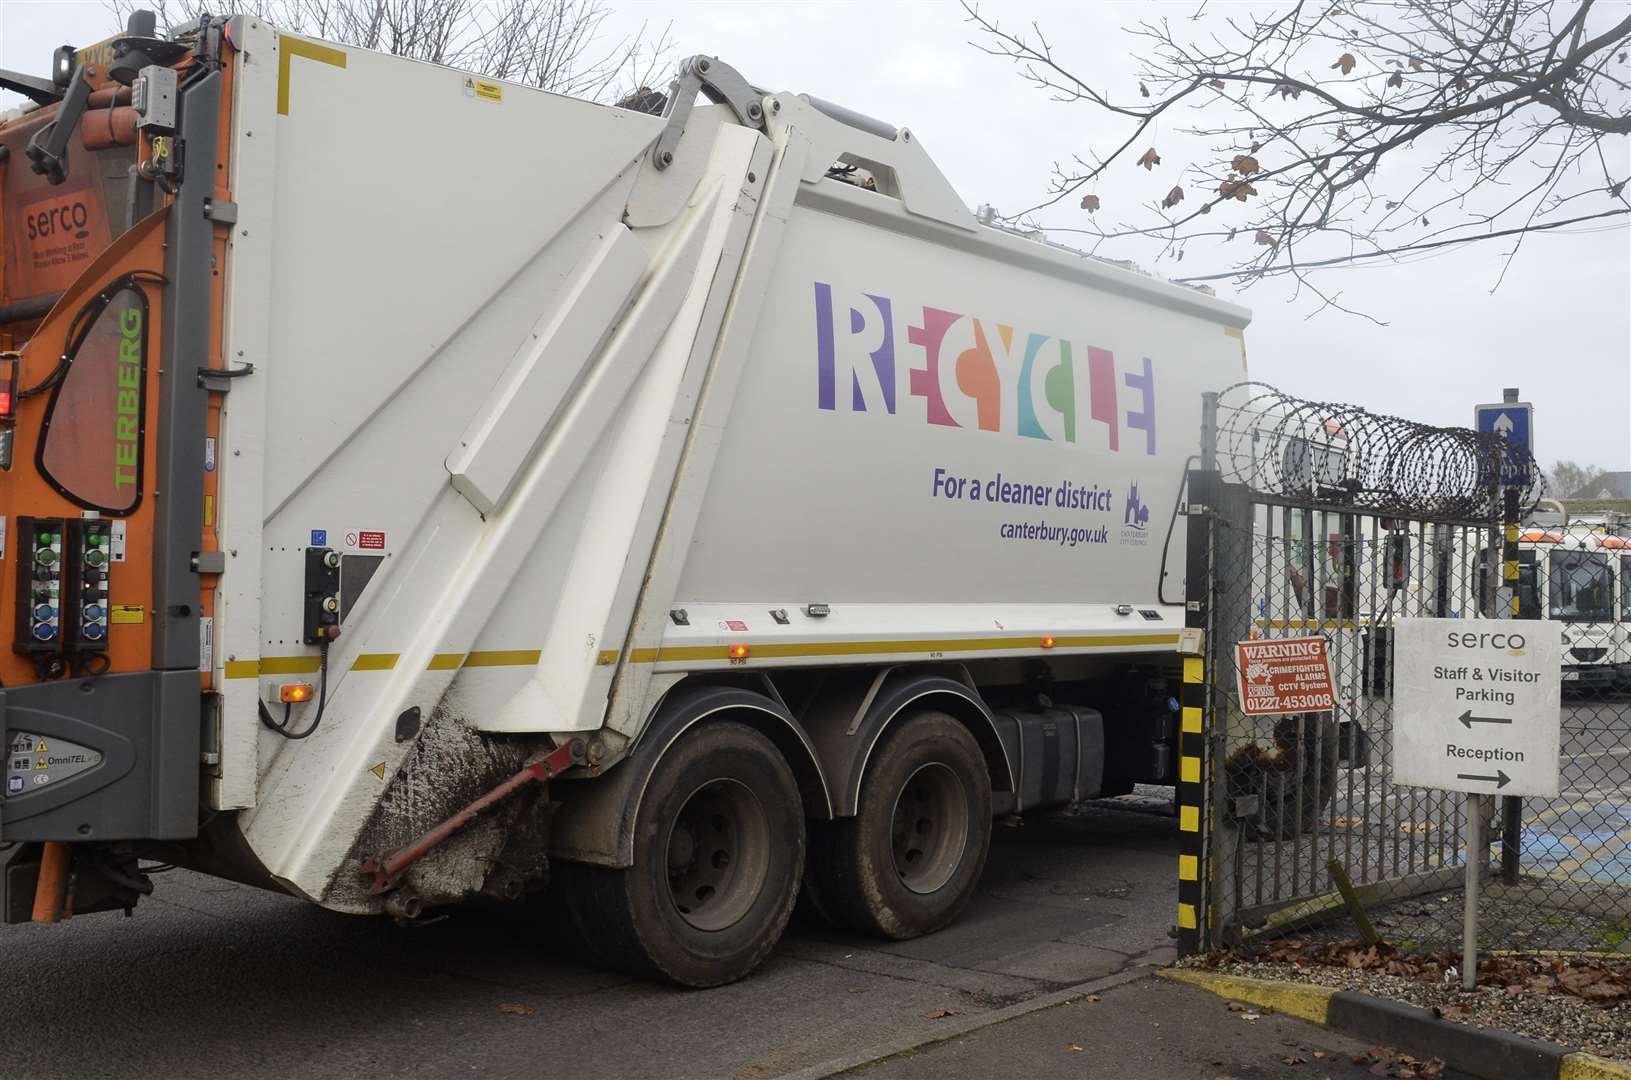 Recycling and general waste collections will continue.